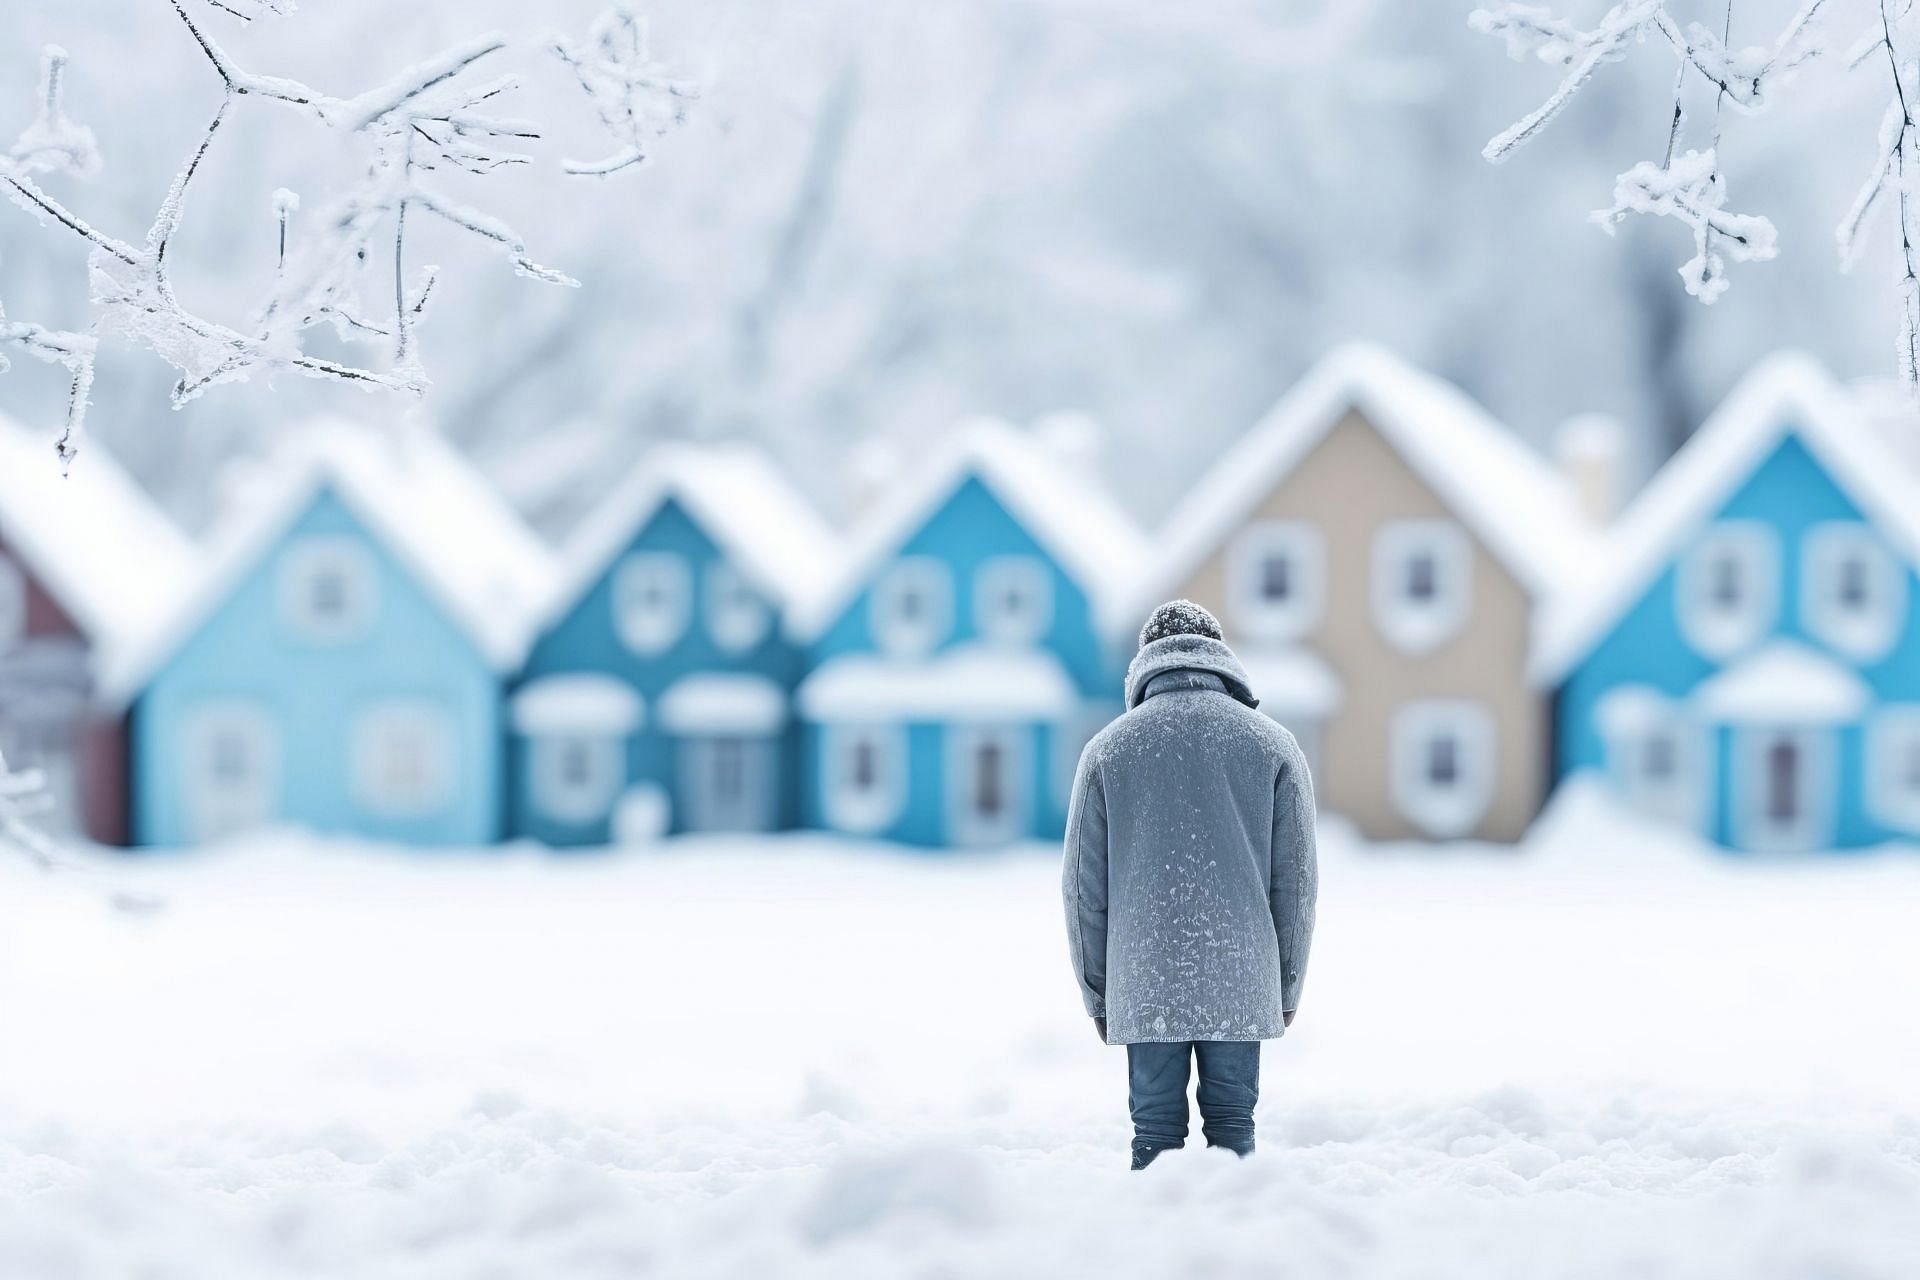 Winter season brings about the coldness and gloominess of winter depression. (Image via Vecteezy/ Olga Gubskaya)